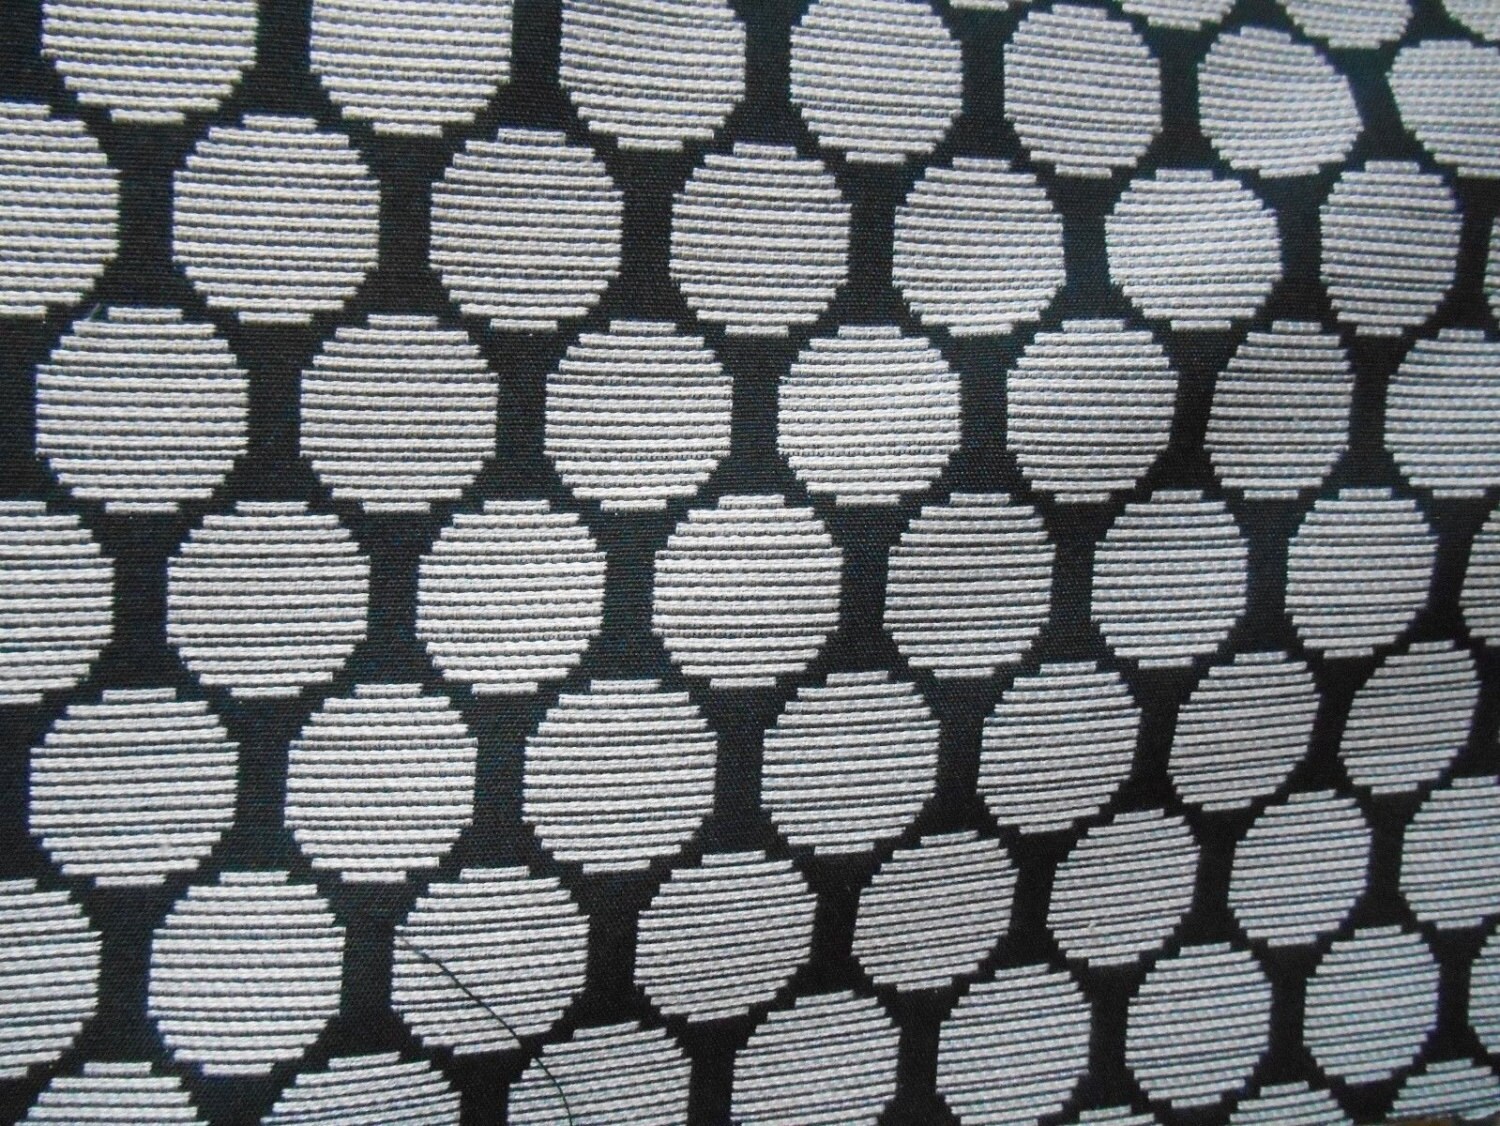 Black White DOTS Woven Upholstery Fabric by the Yard Home Decor,40-29 ...